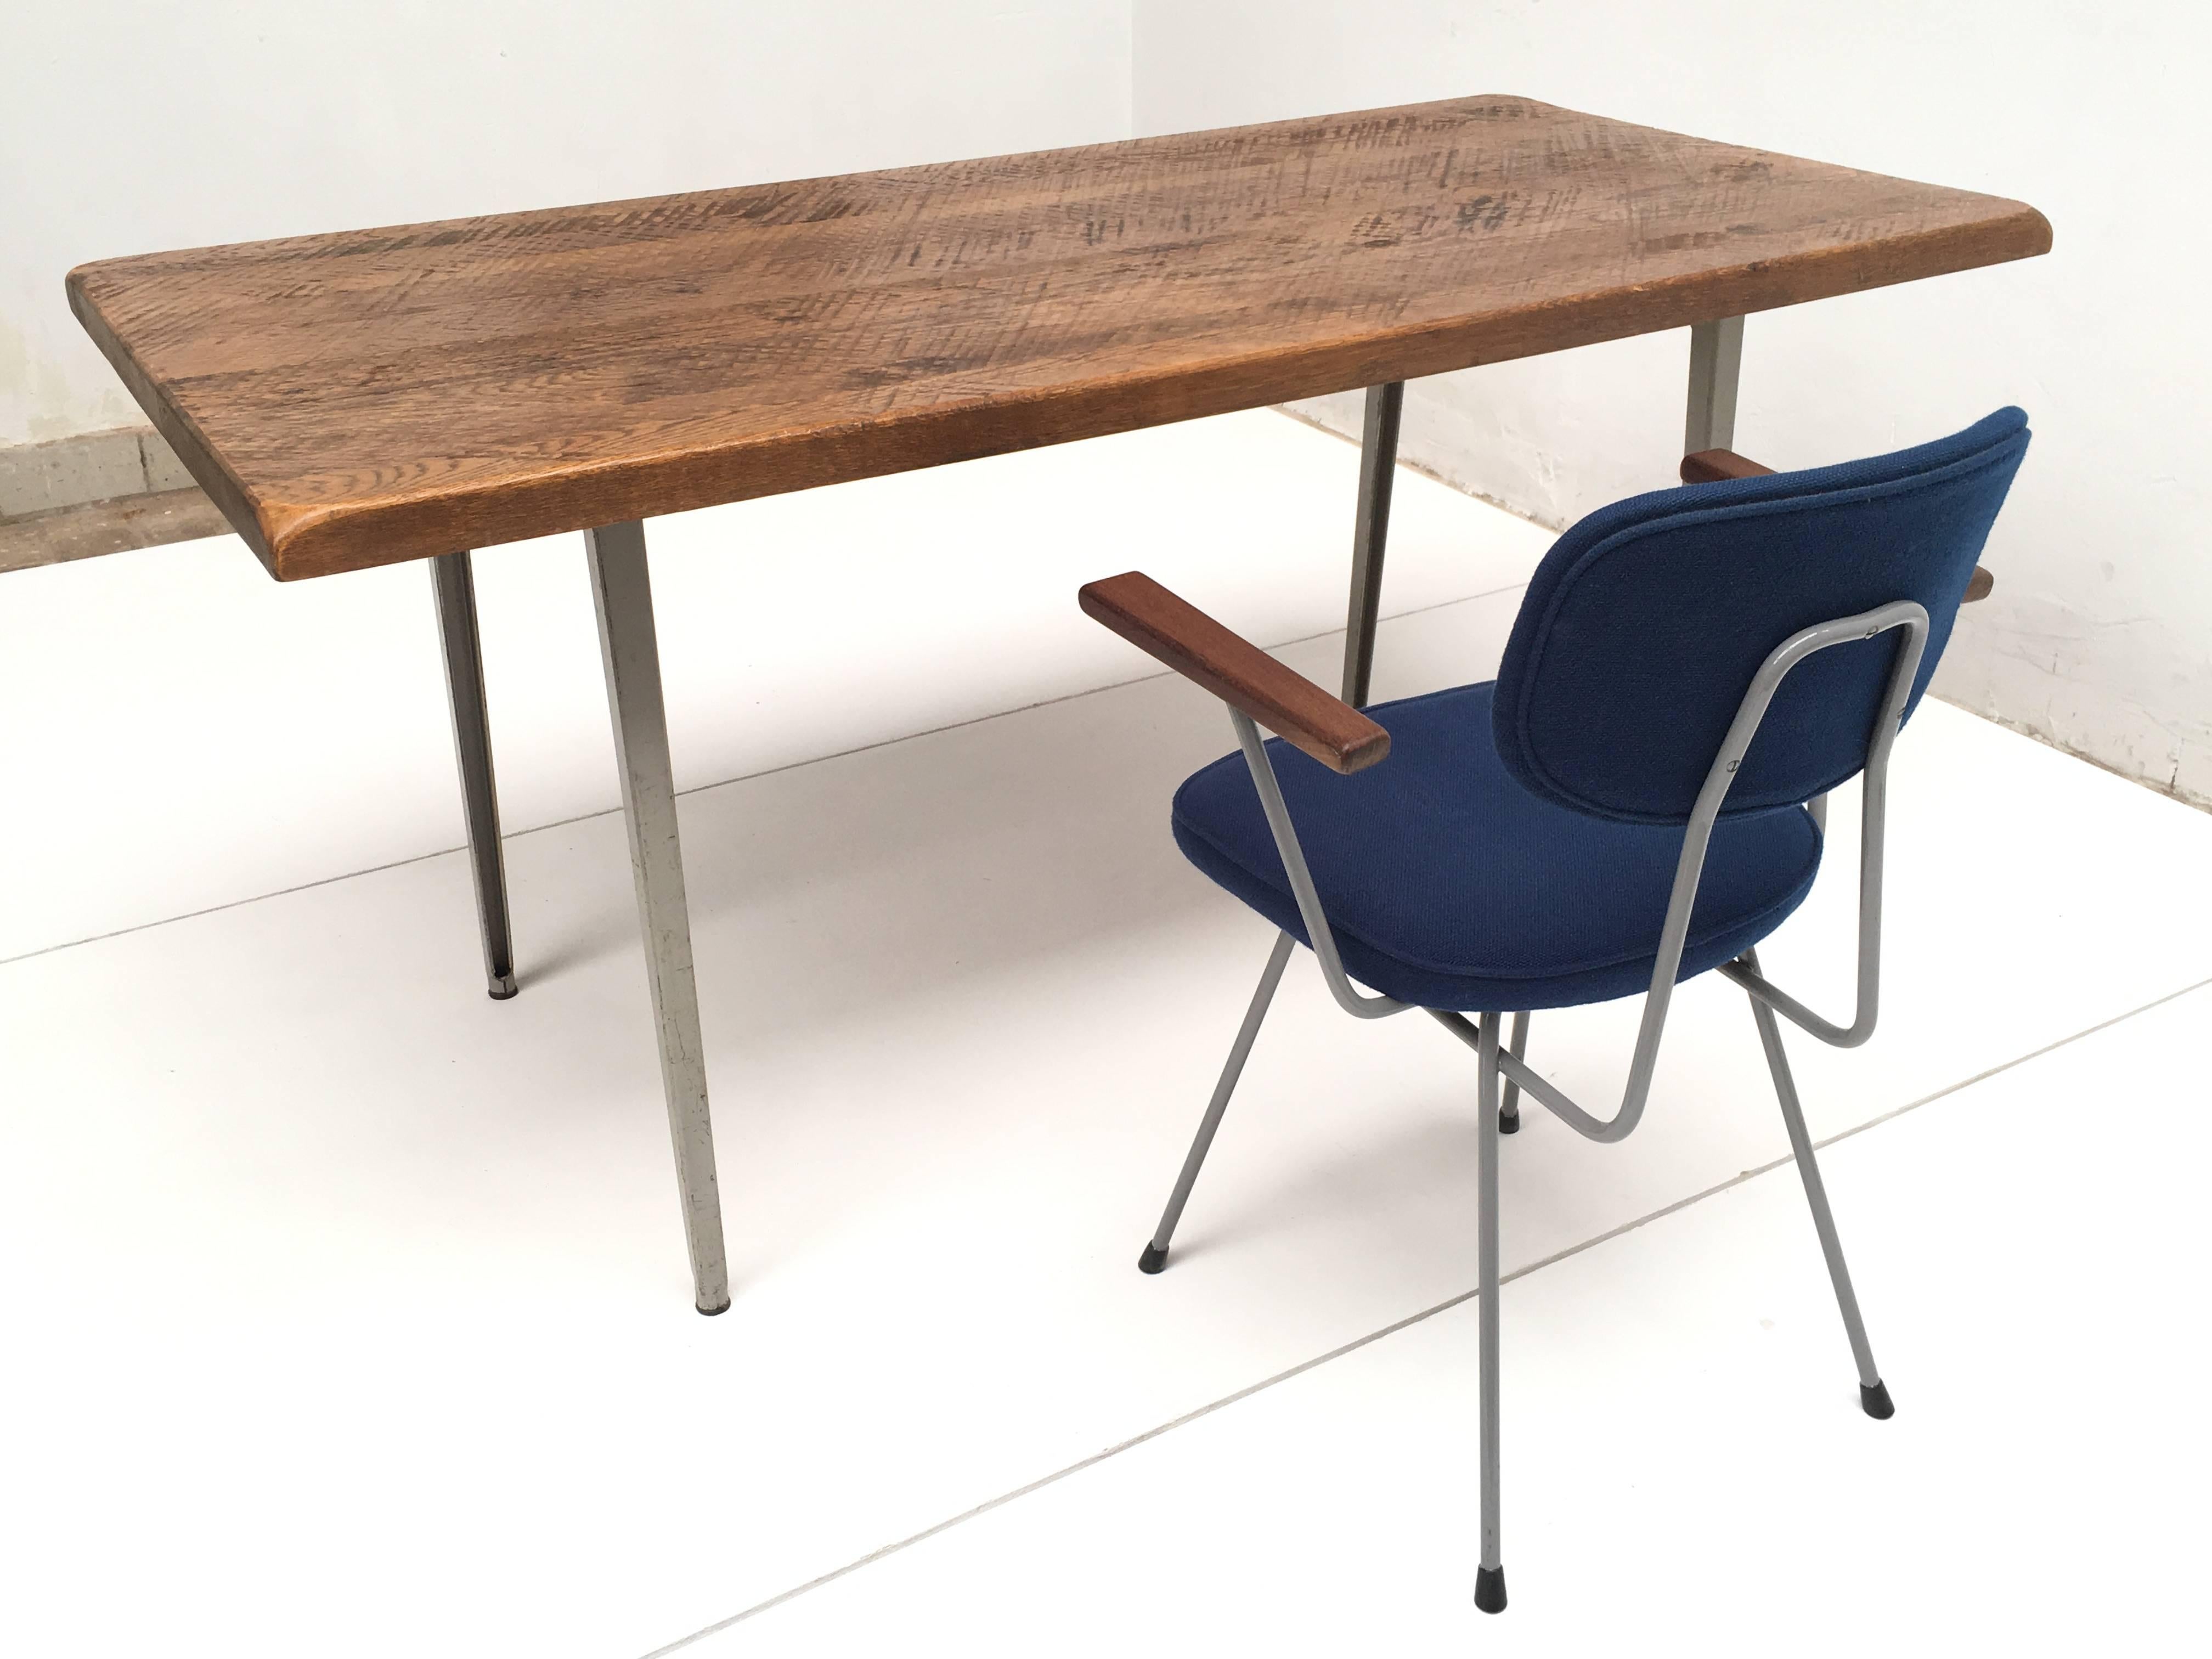 Hand-Crafted Friso Kramer 'Reform' Table or Desk with Reclaimed Rustic Oak Top For Sale